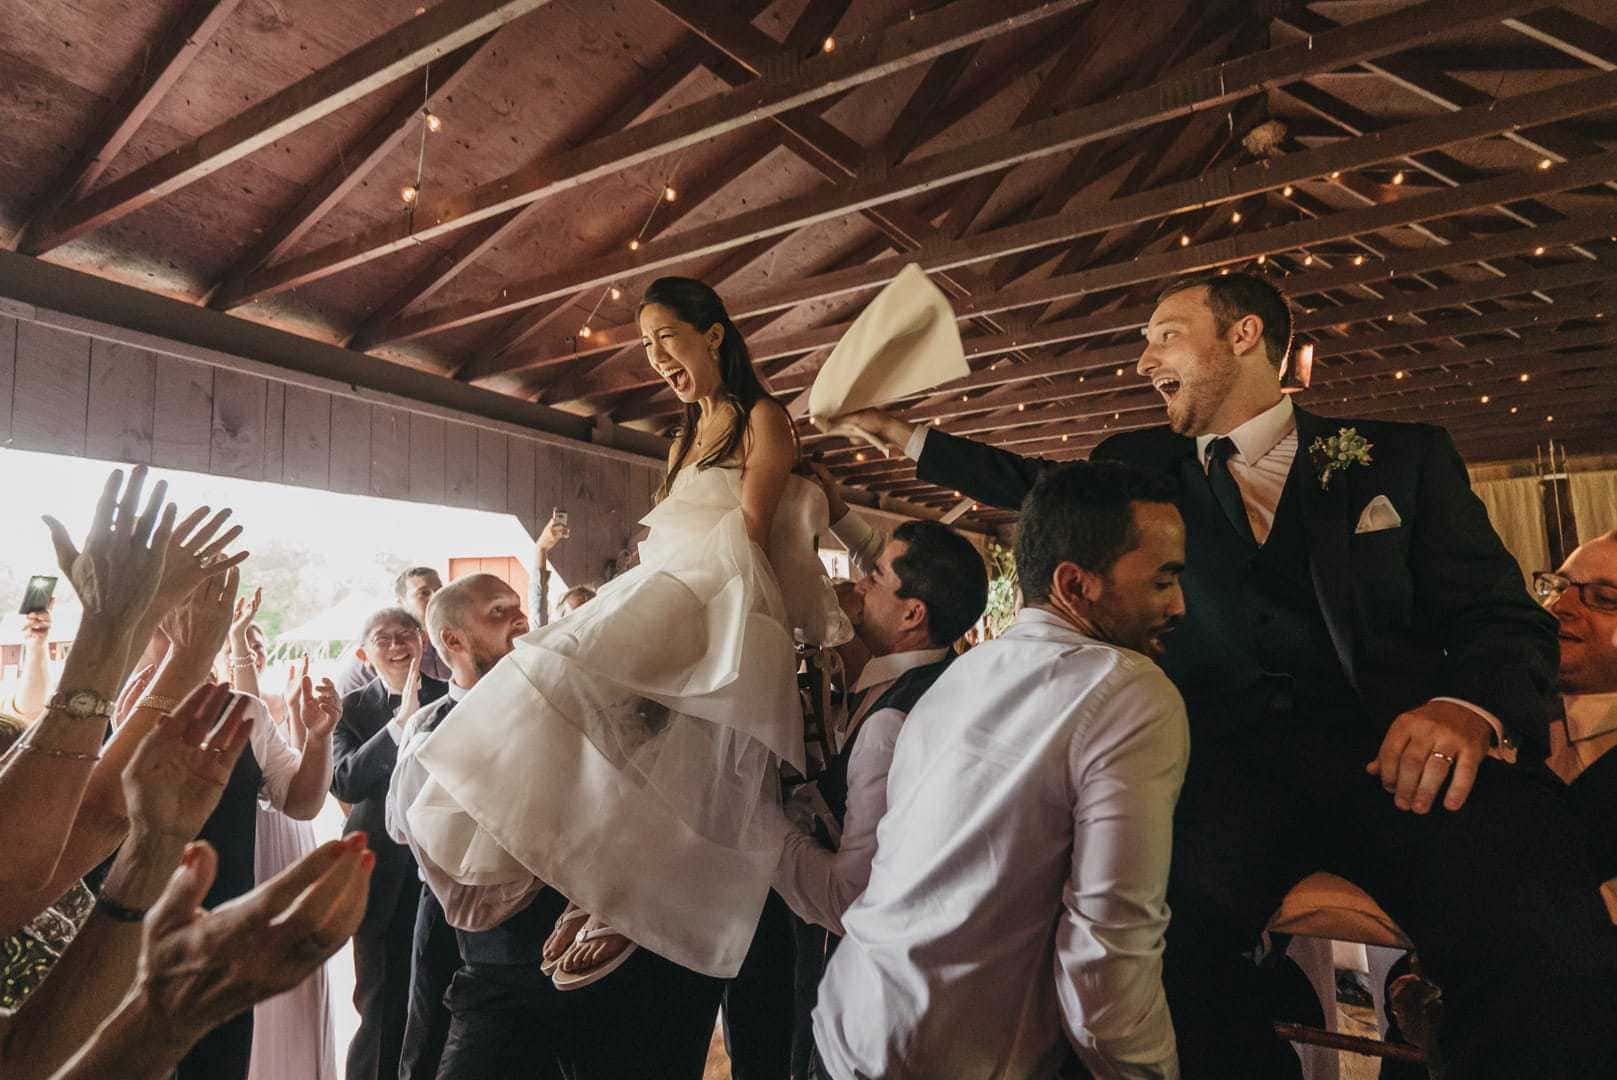 Bride and groom are lifted up on chairs during hora at wedding reception, groom looking excited and bride smiling widely but nervously.